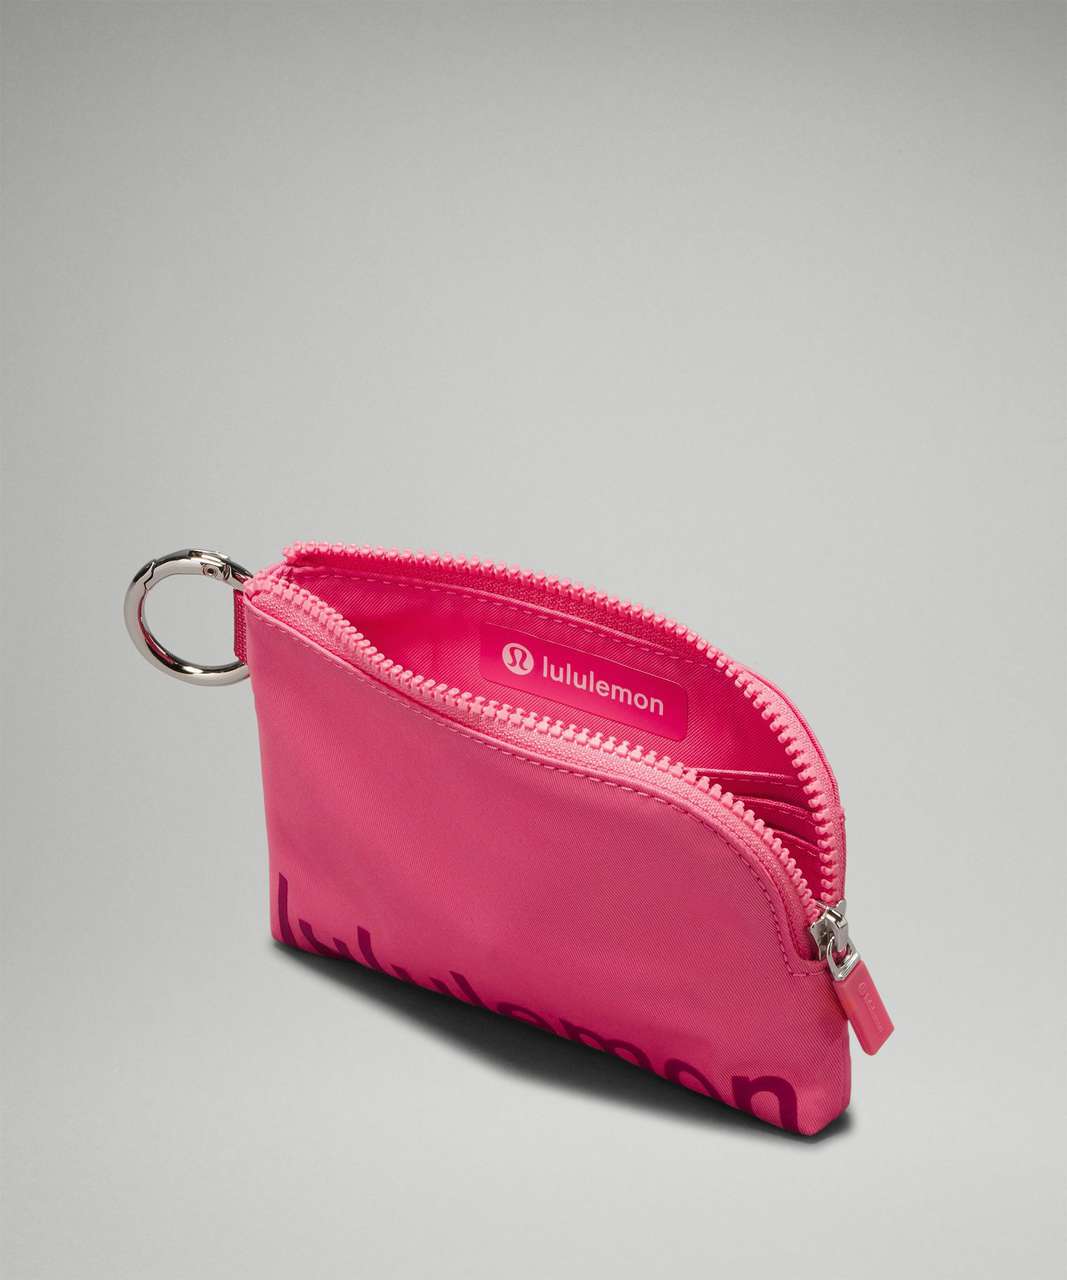 Lululemon Clippable Card Pouch - Sakura Pink / Washed Mauve